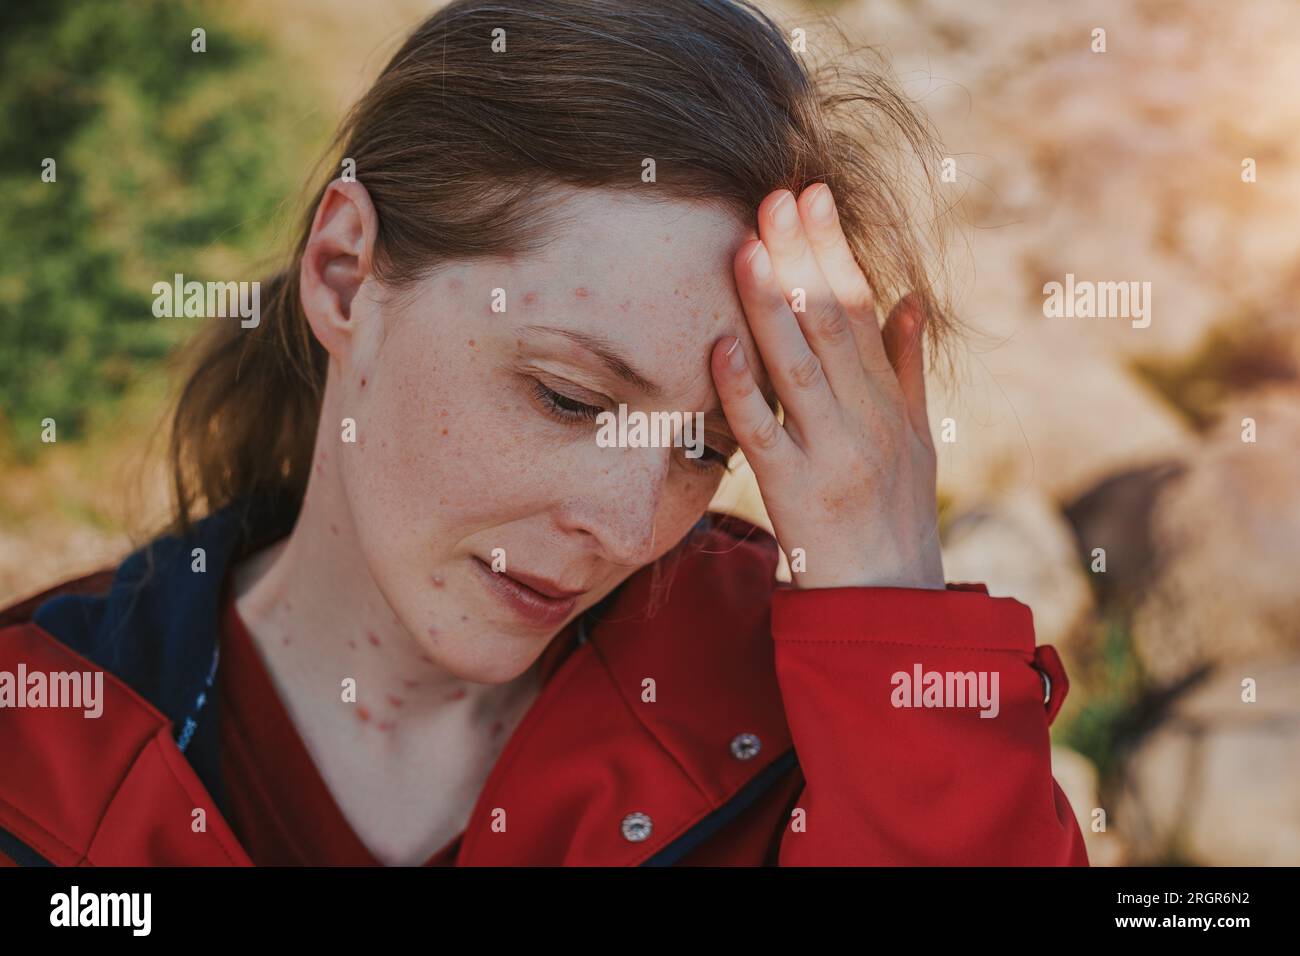 Portrait of a sad woman with chicken pox outdoors Stock Photo